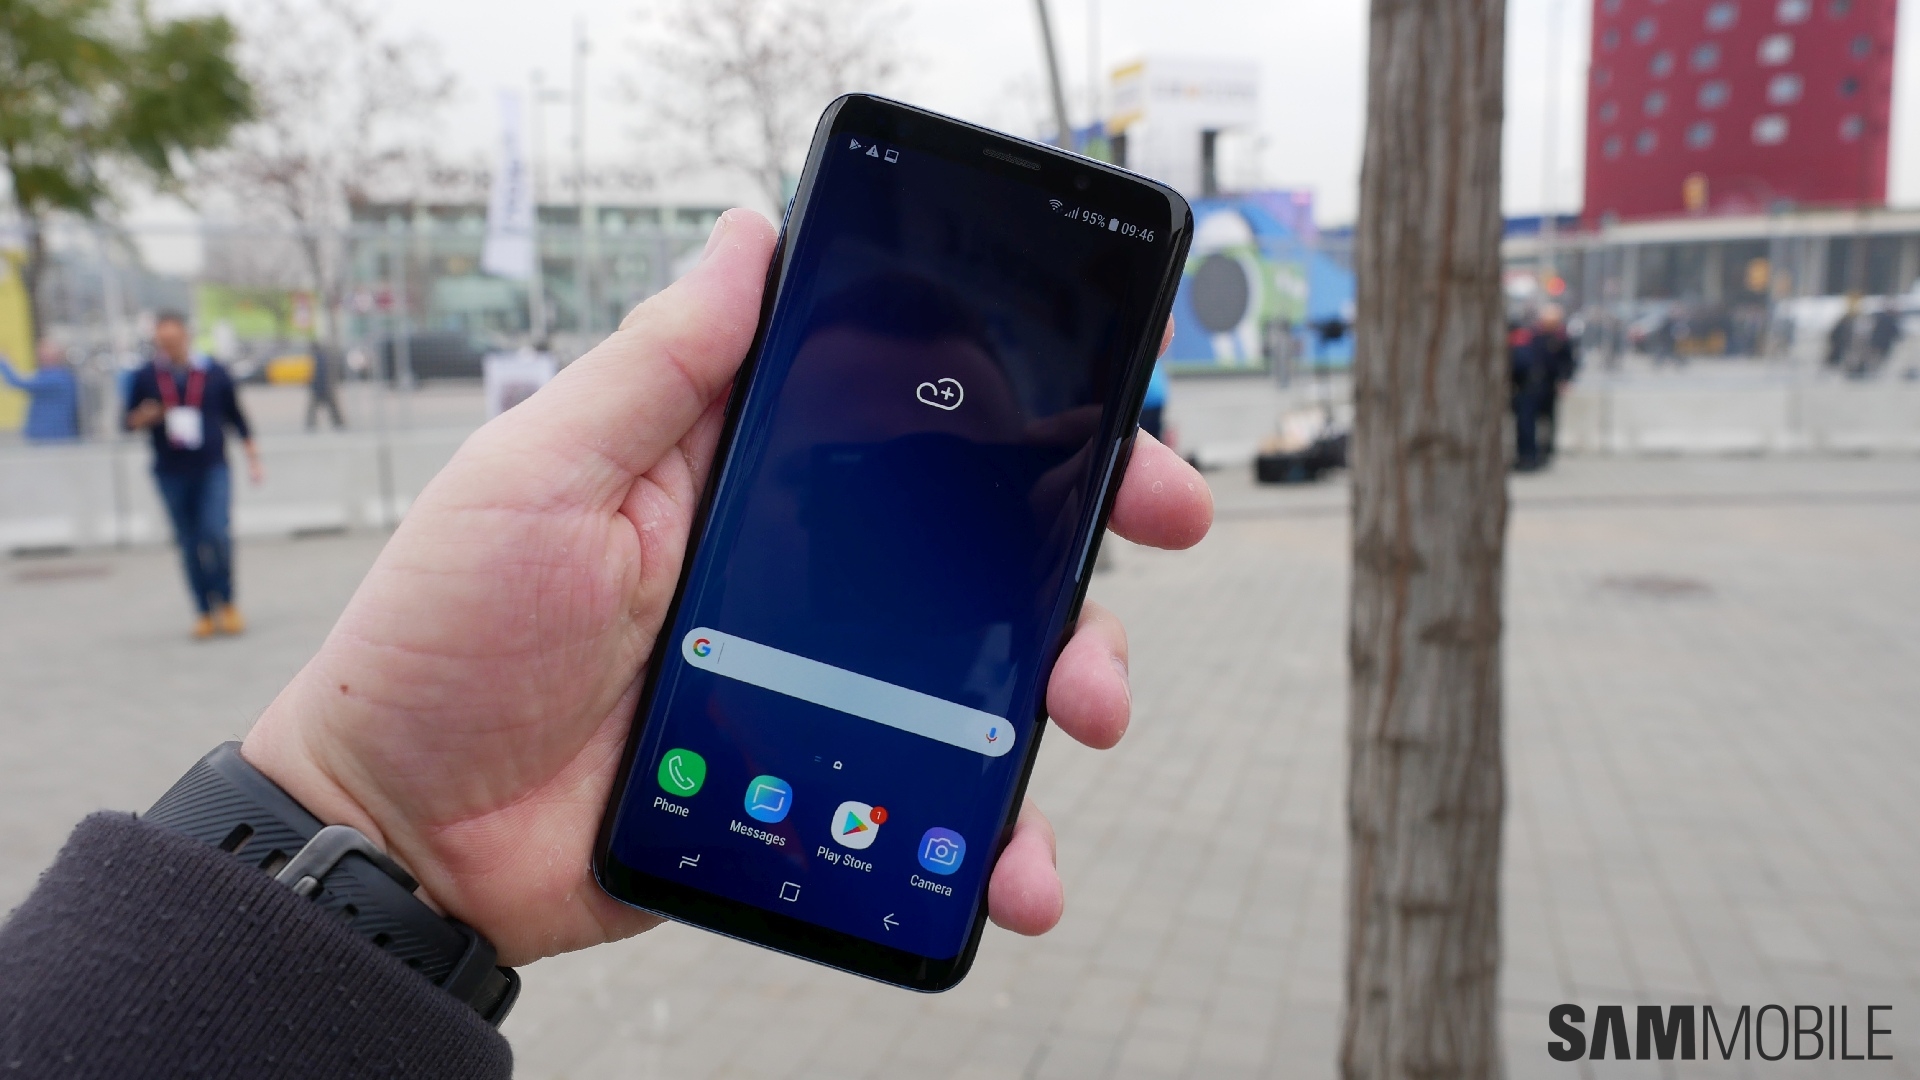 Galaxy S10 rumors about a name change confirmed by Samsung - SamMobile